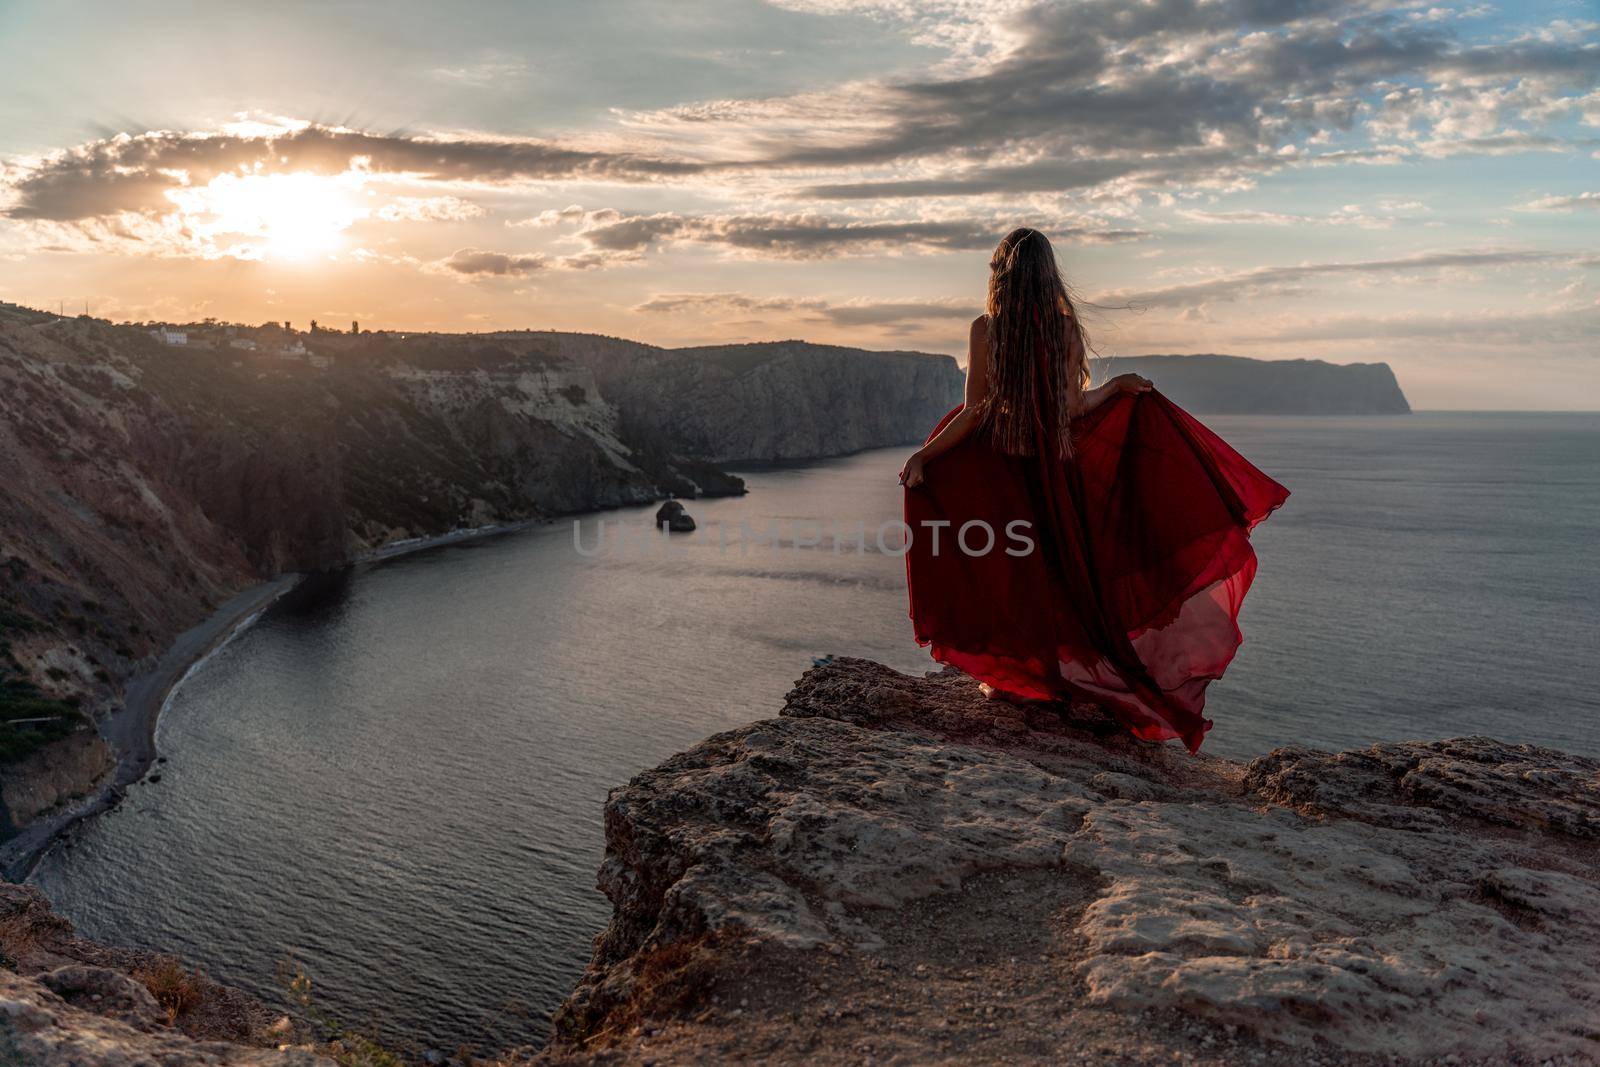 A girl with loose hair in a red dress waved her skirt on the yellow rocks overlooking the sea. In the background, the sun rises from behind the mountains